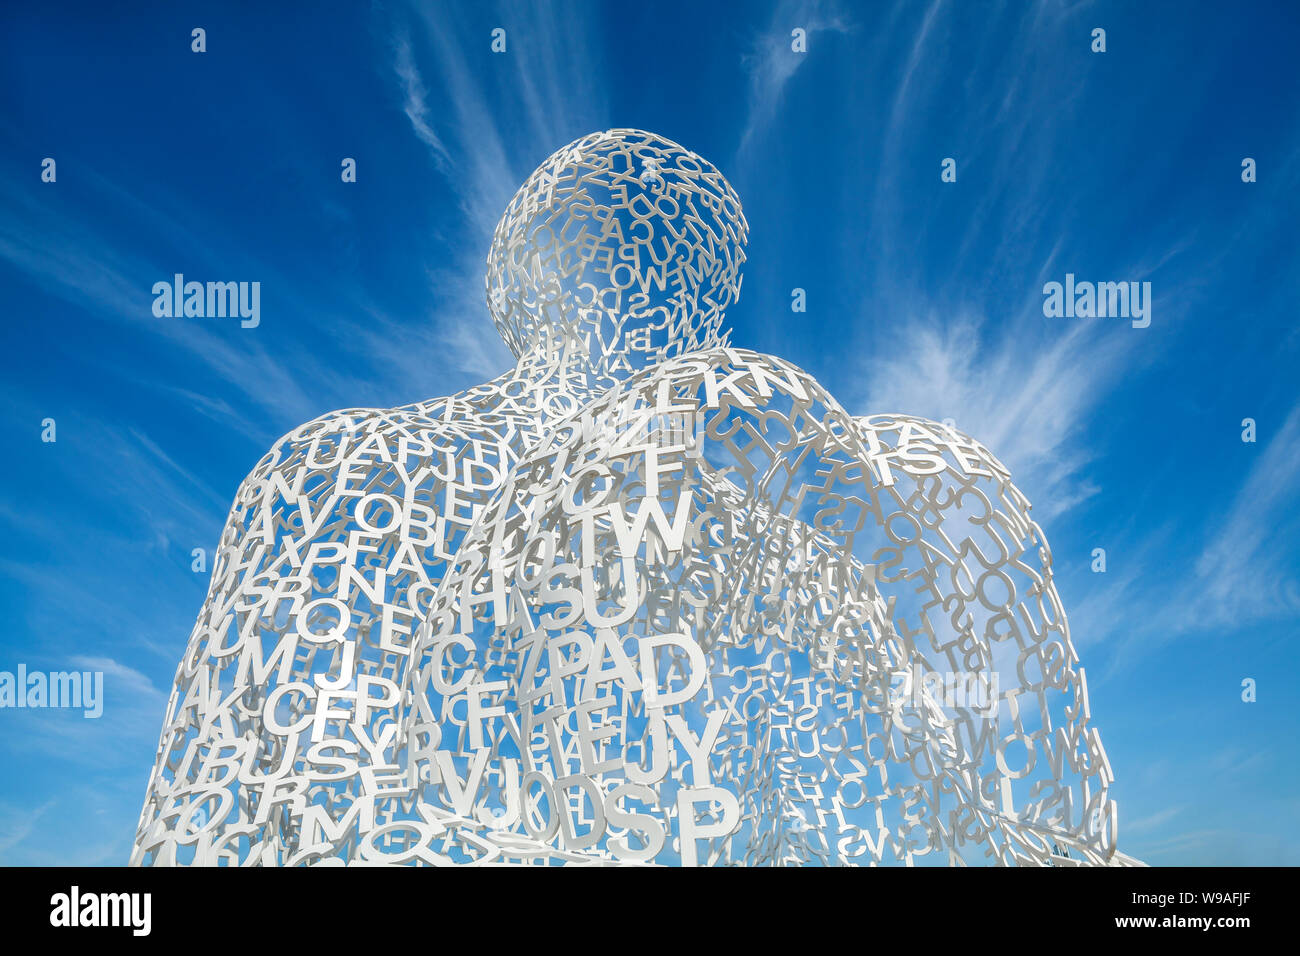 Antibes, France - July 17, 2019: View of Nomade sculpture from the Spanish artist Jaume Plenza in Antibes France. Stock Photo